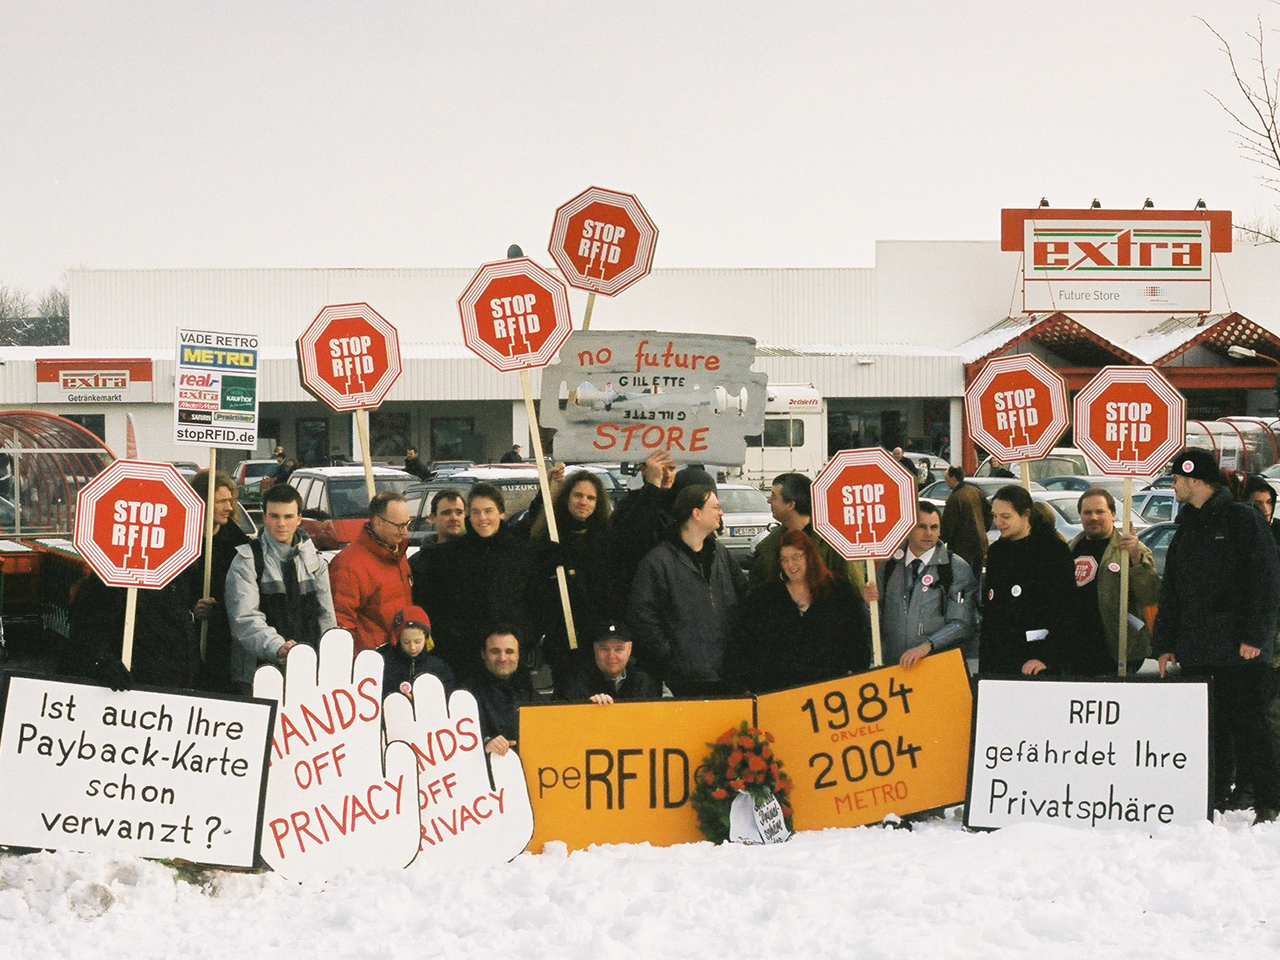 Protesters in front of the Future Store with "Stop RFID" signs